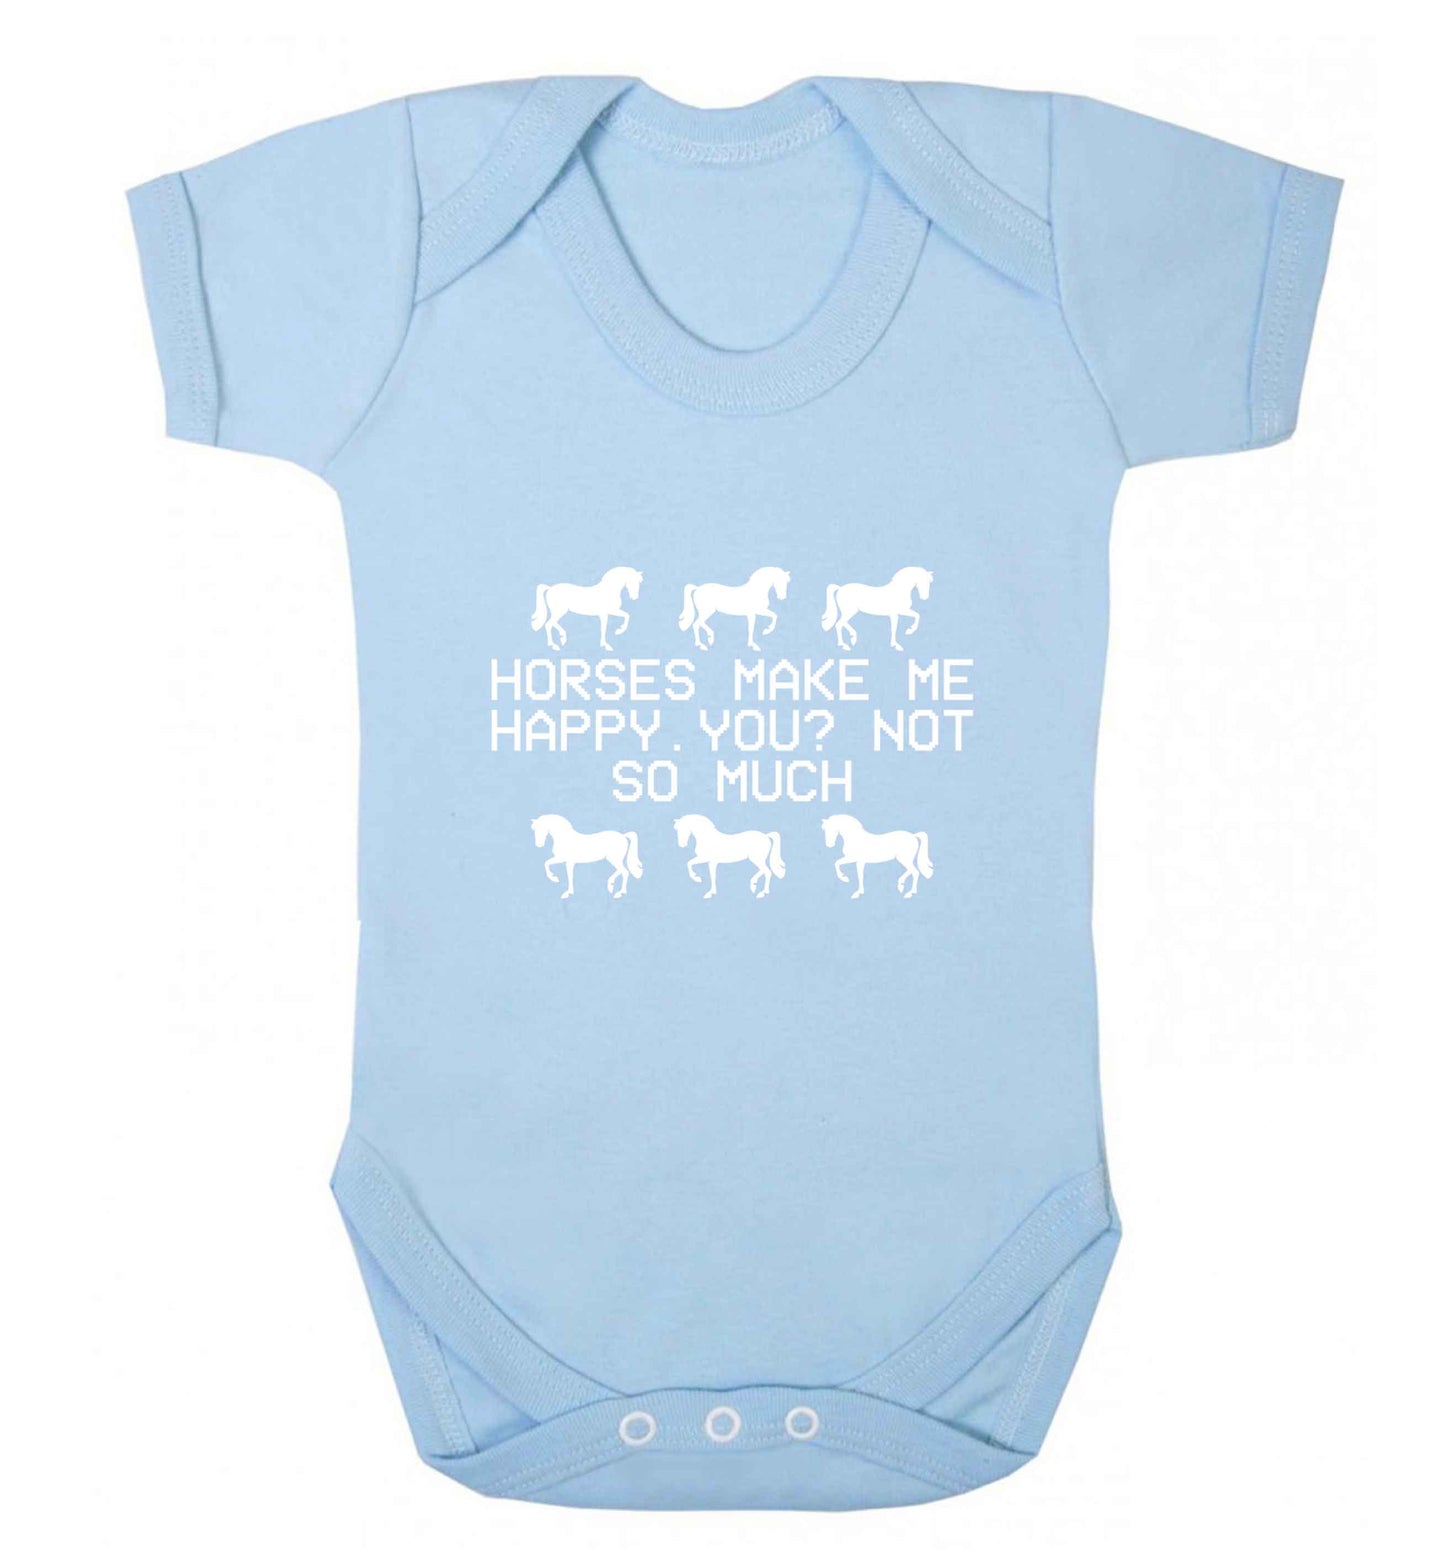 Horses make me happy, you not so much baby vest pale blue 18-24 months